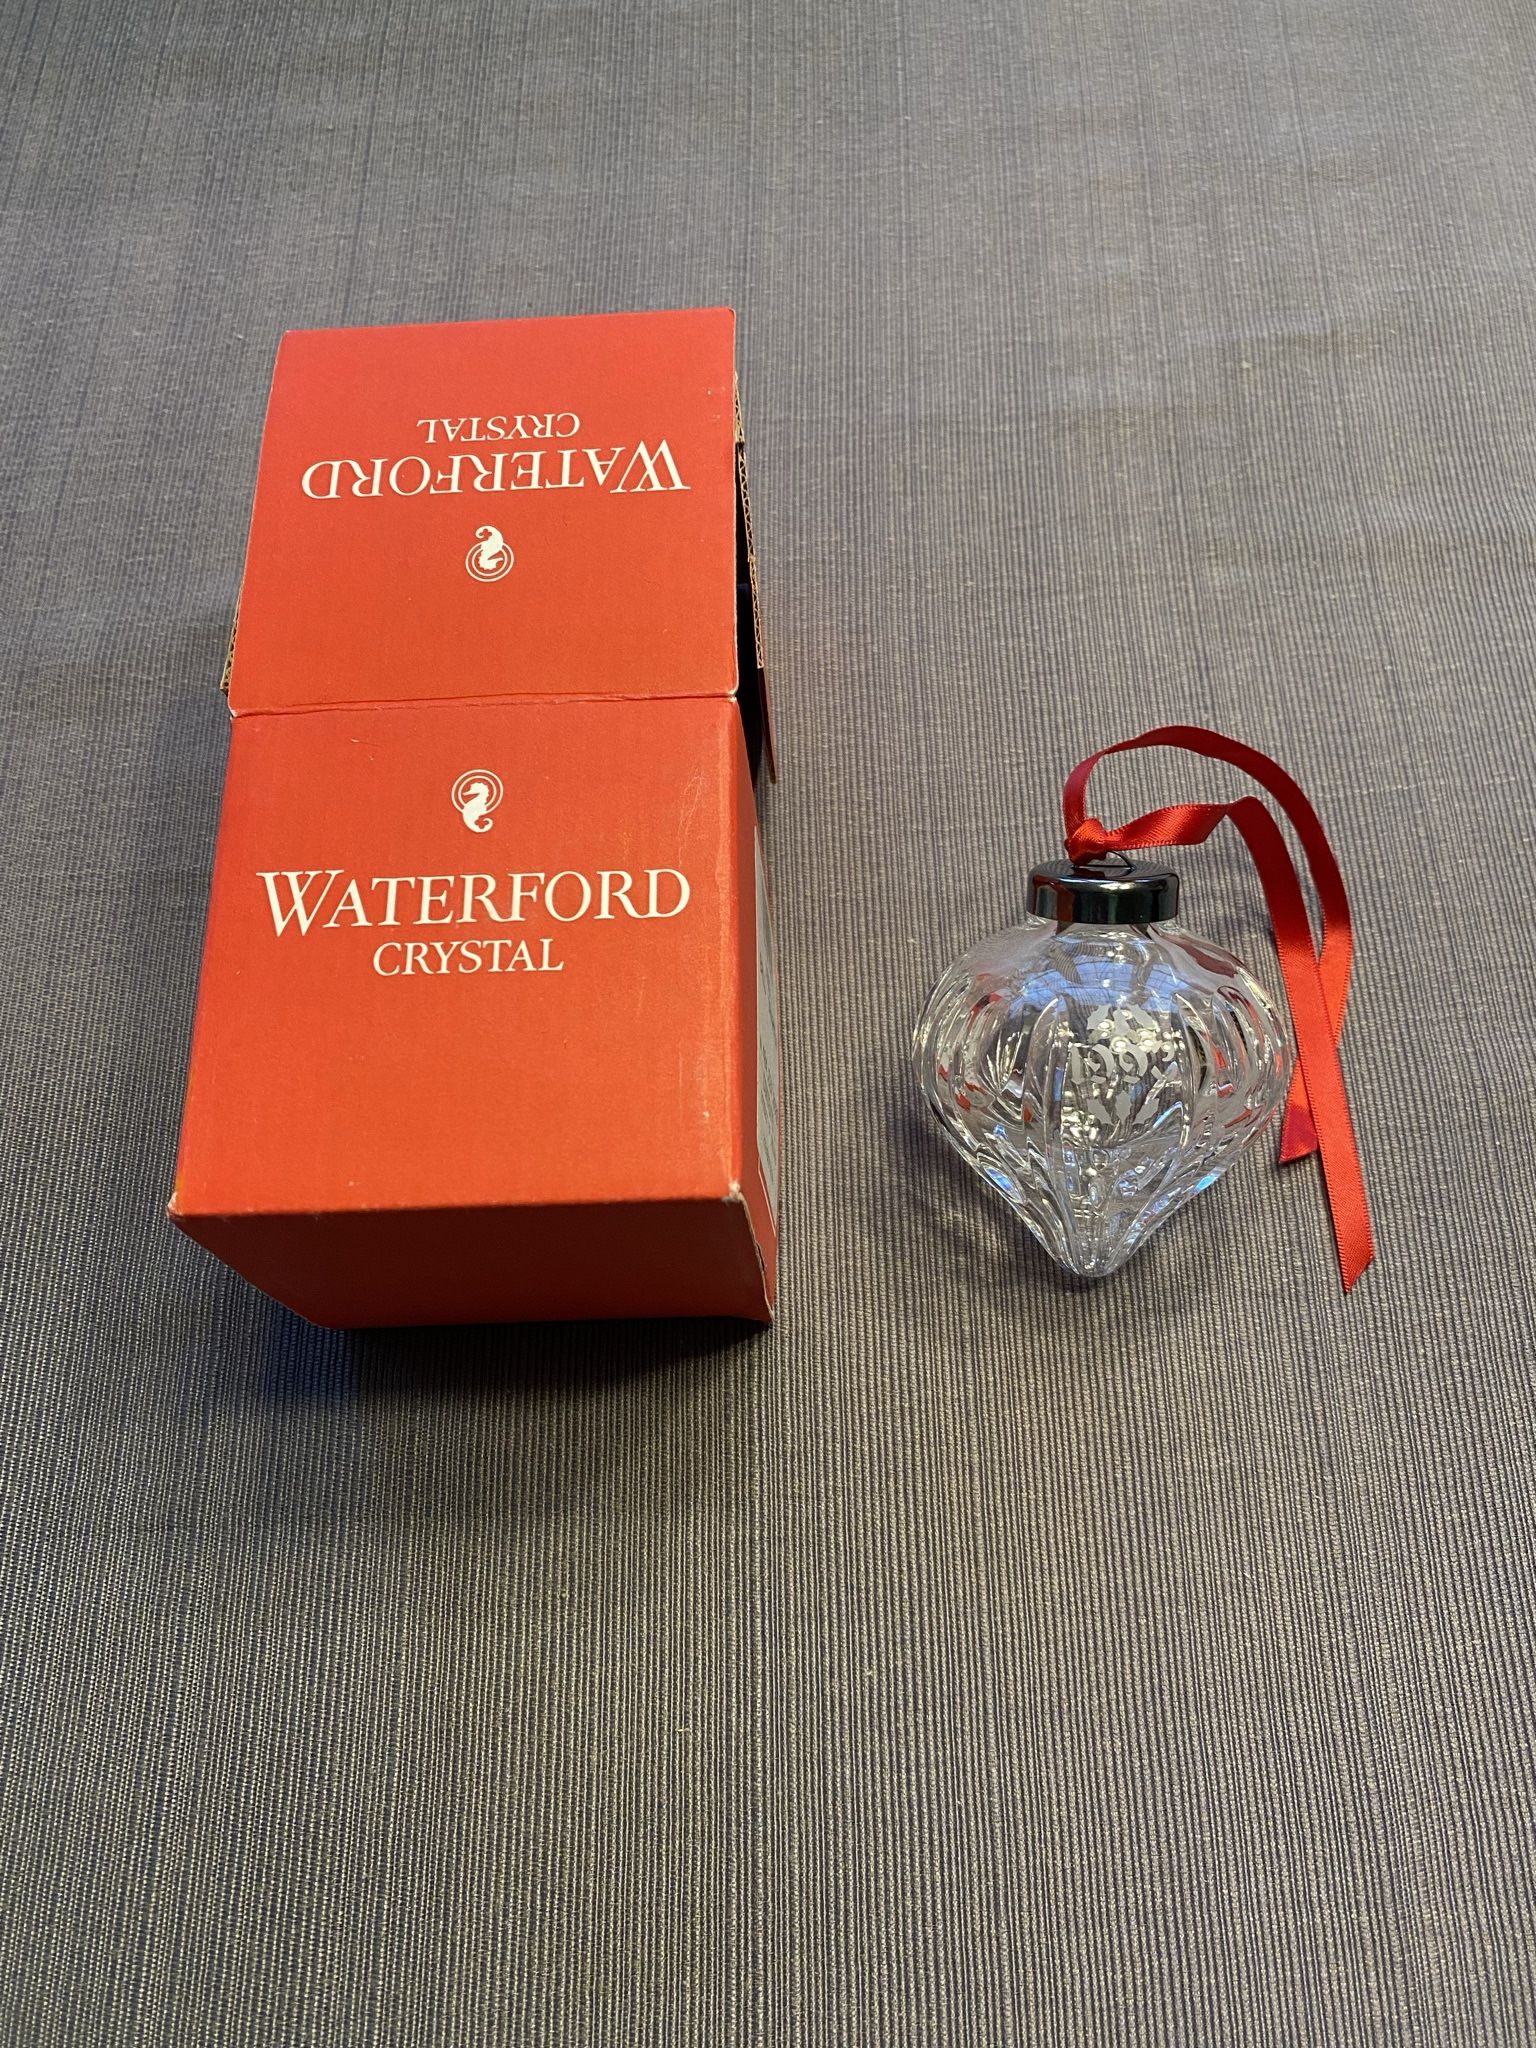 Genuine Waterford Crystal 1993 Annual Christmas Ball Ornament, mint condition in box